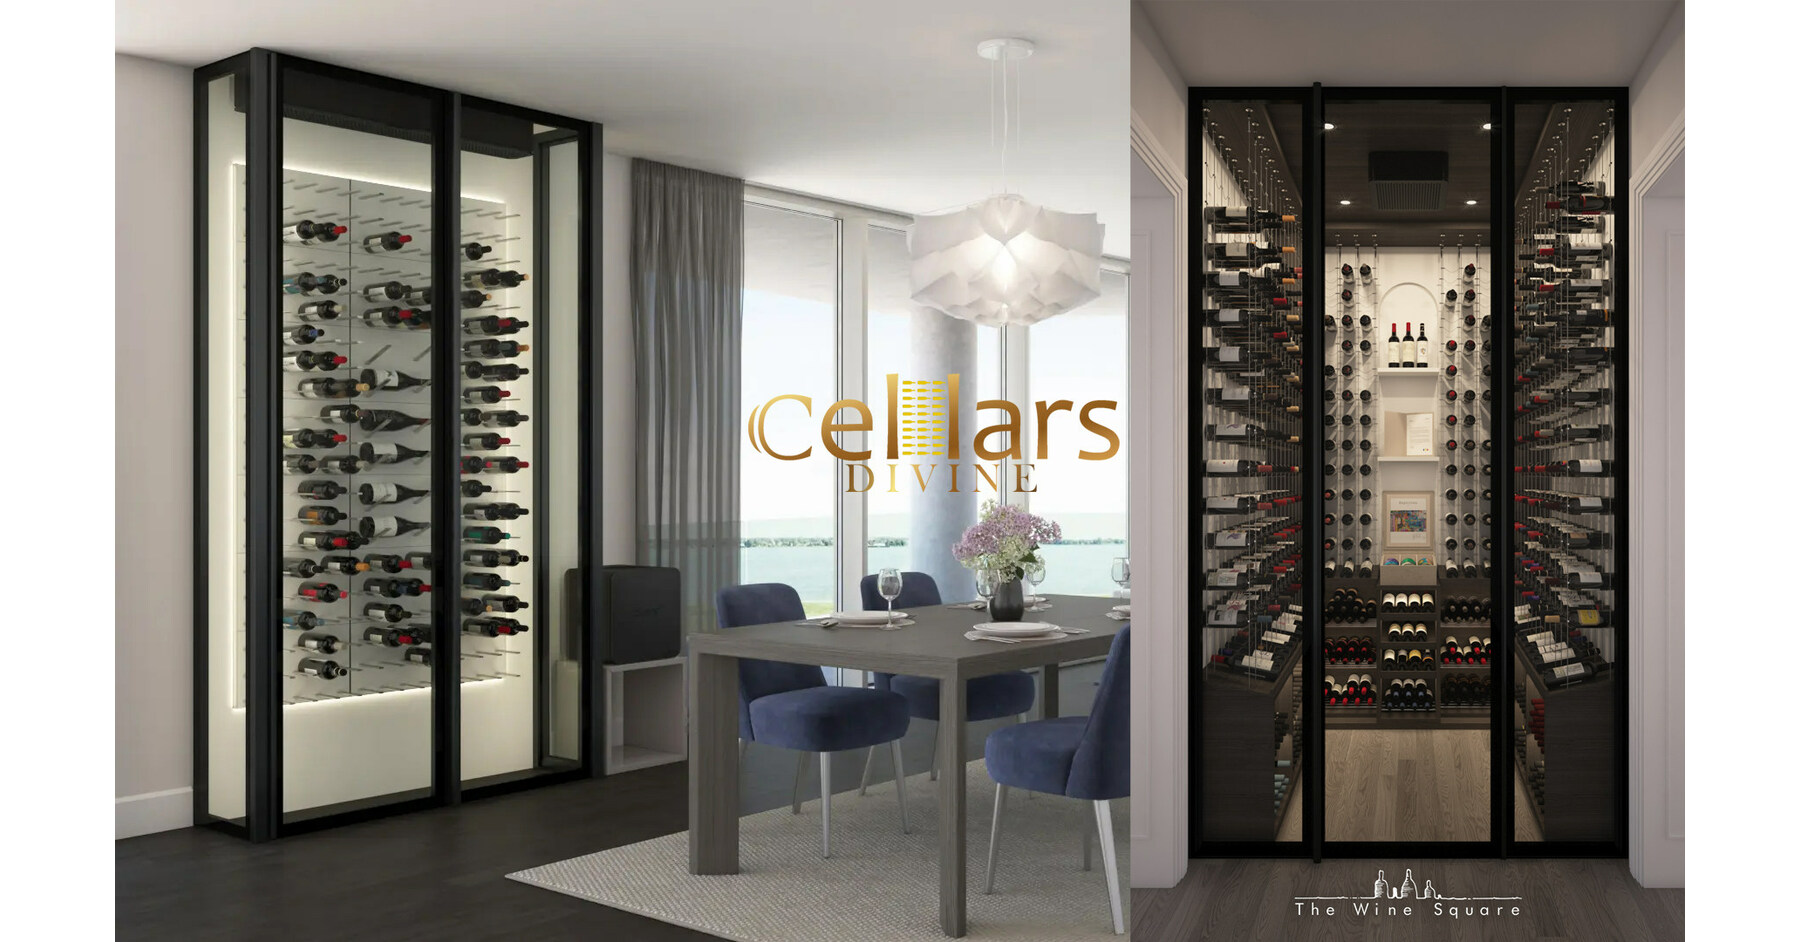 HILKNIGHTLY launches Cellarsdivine.com for Designer Wine Enclosures and Cellars Customized for the Indian market